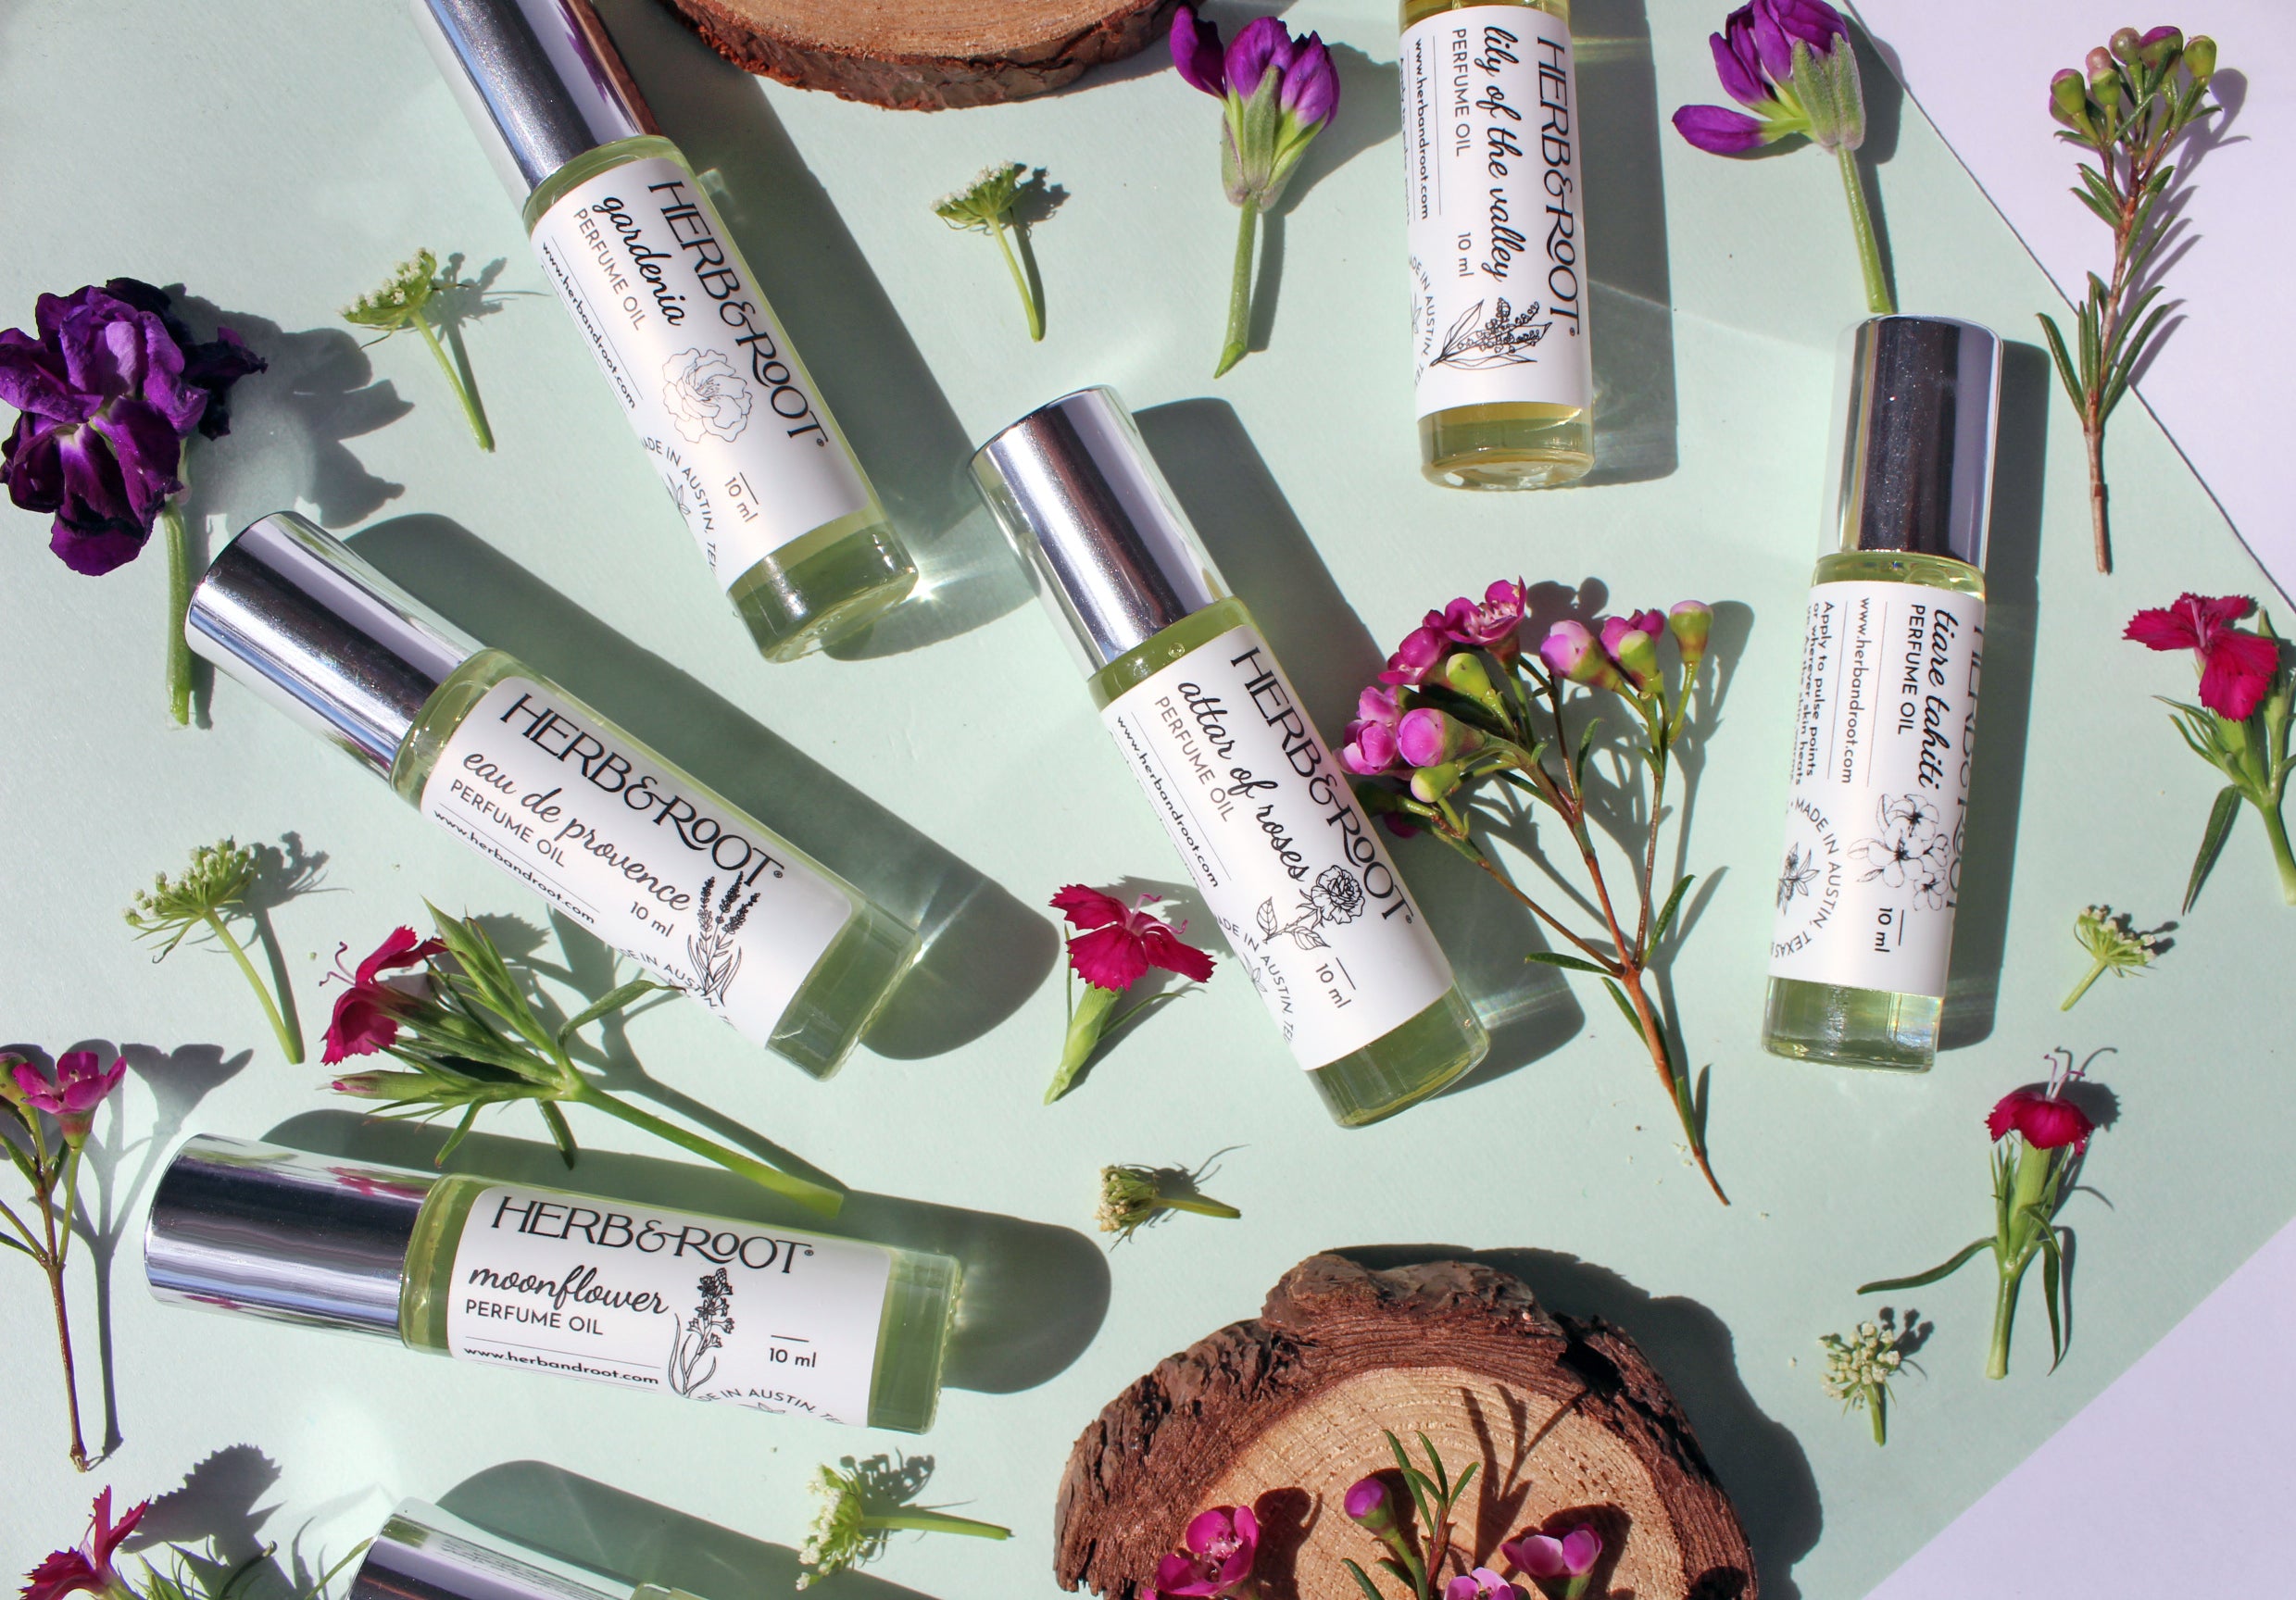 Scents to Freshen up your Spring Mood